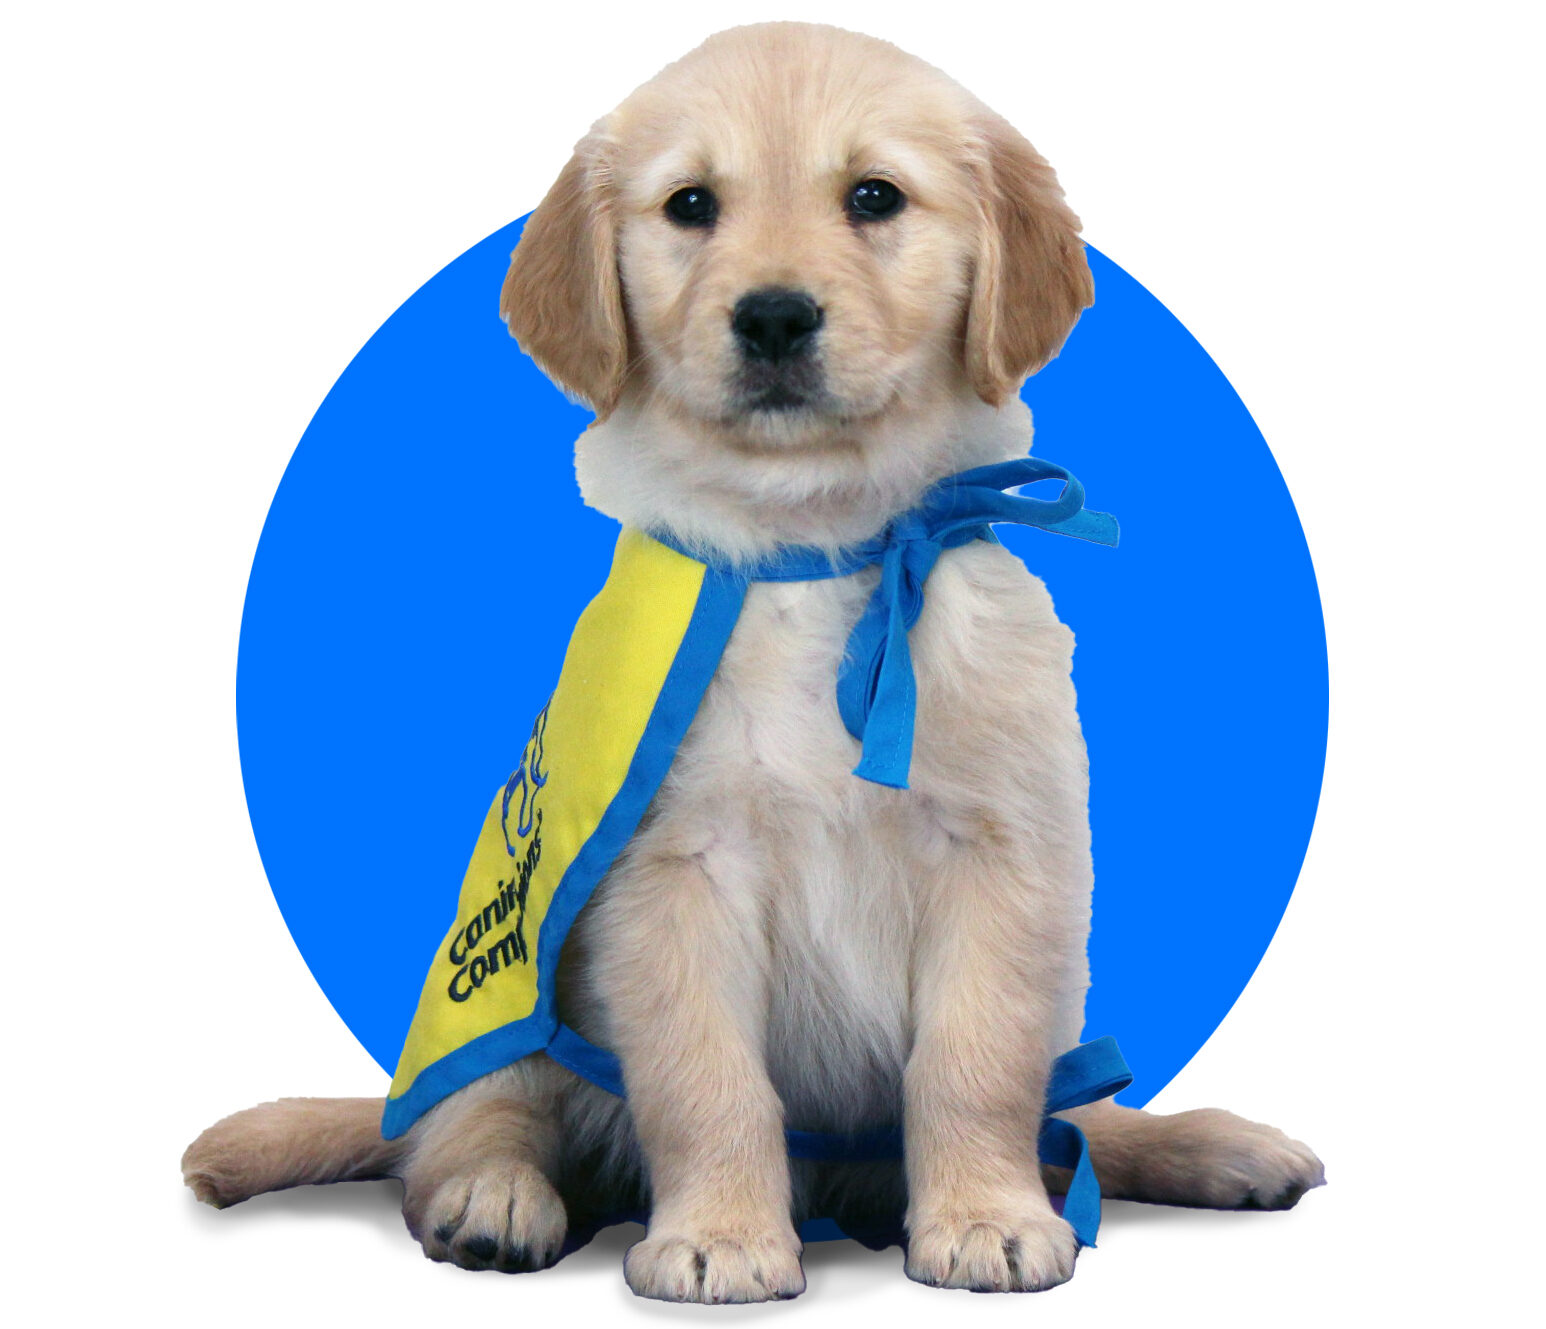 Puppy Libby wearing a blue vest with a blue circle background